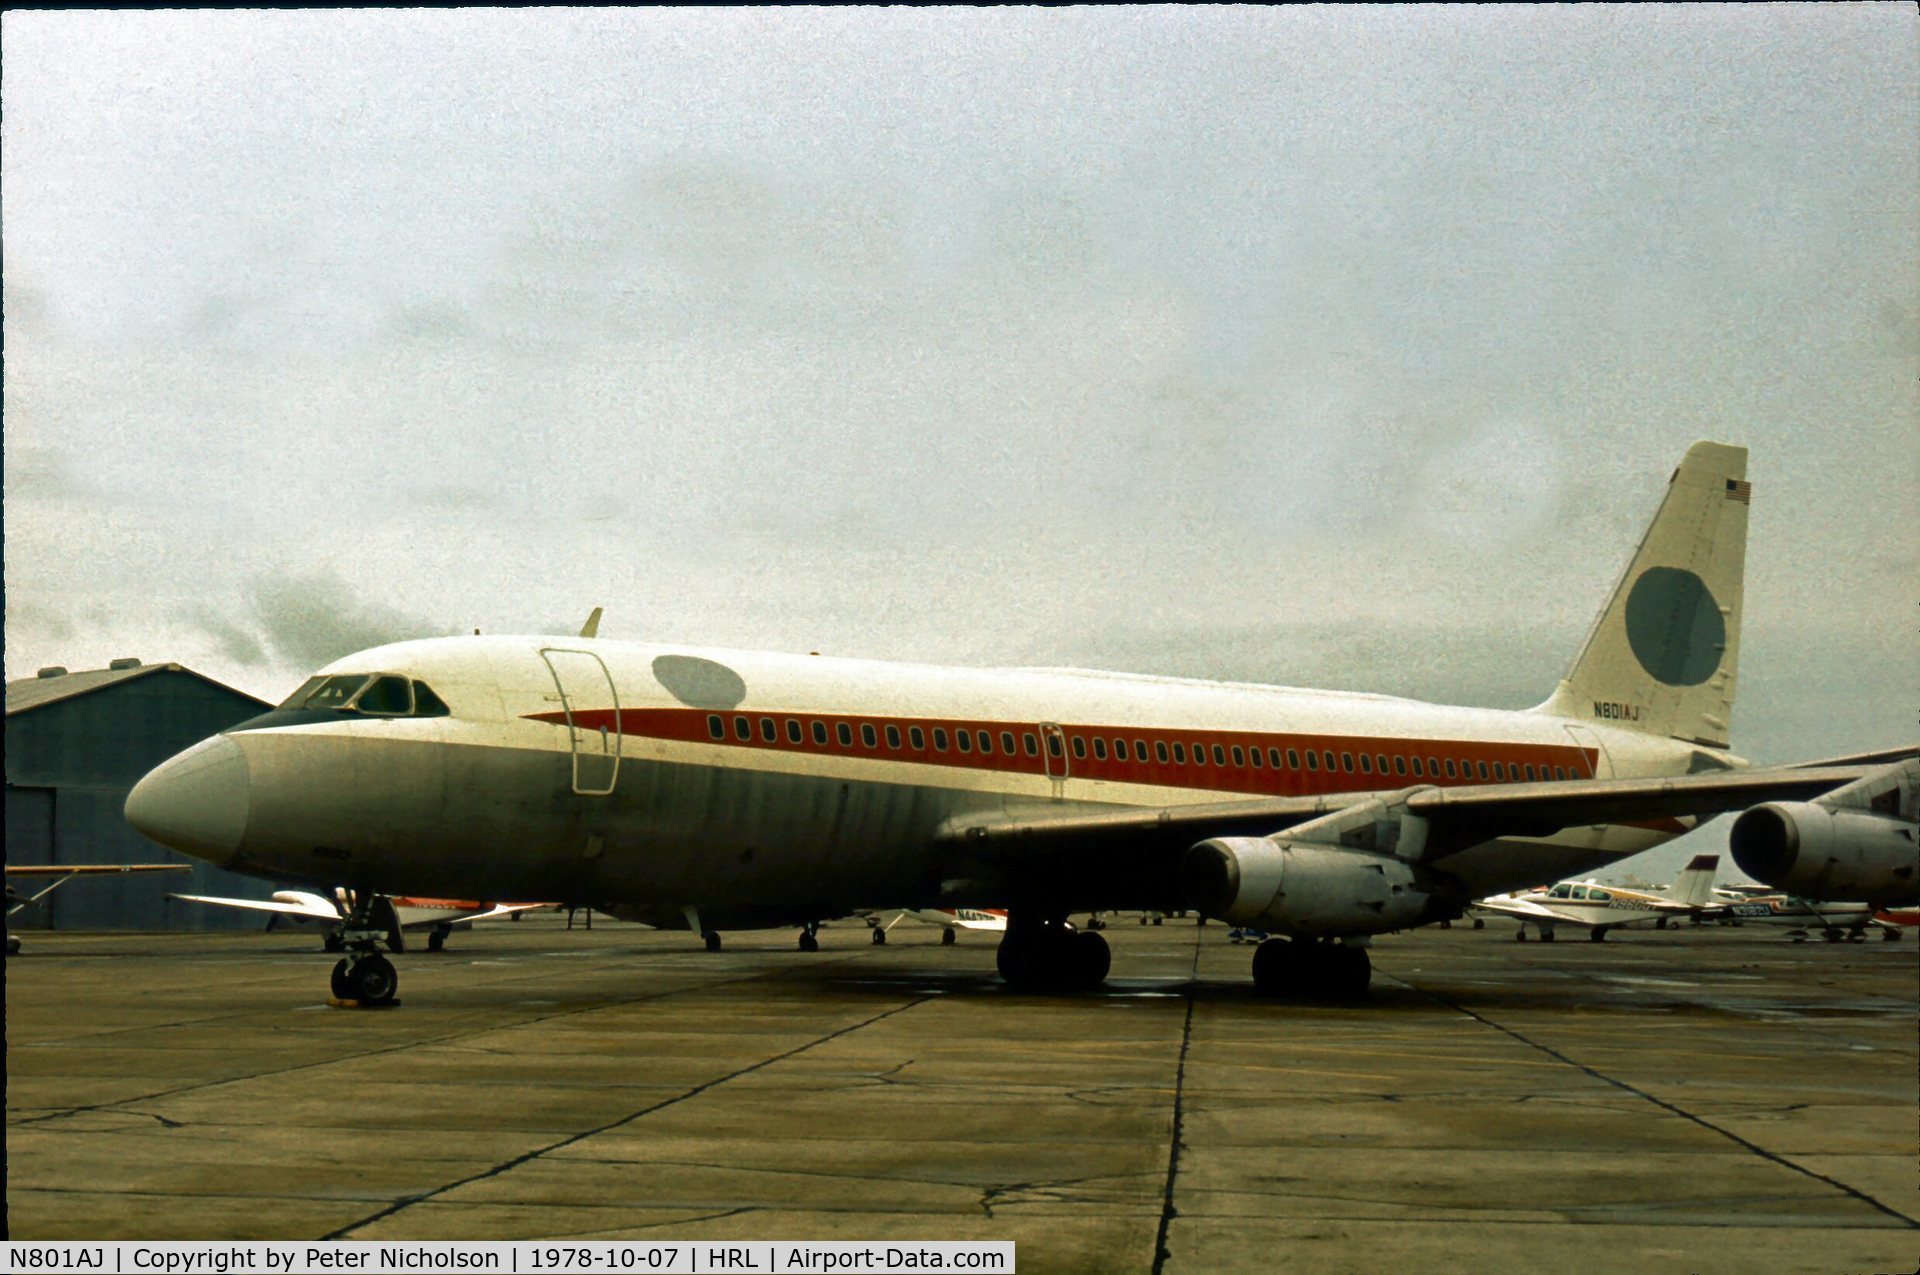 N801AJ, 1961 Convair 880-22-1 C/N 22-00-3, This is how this Convair 880 looked in 1978 after being acquired by American Jet Industries - former TWA N803TW